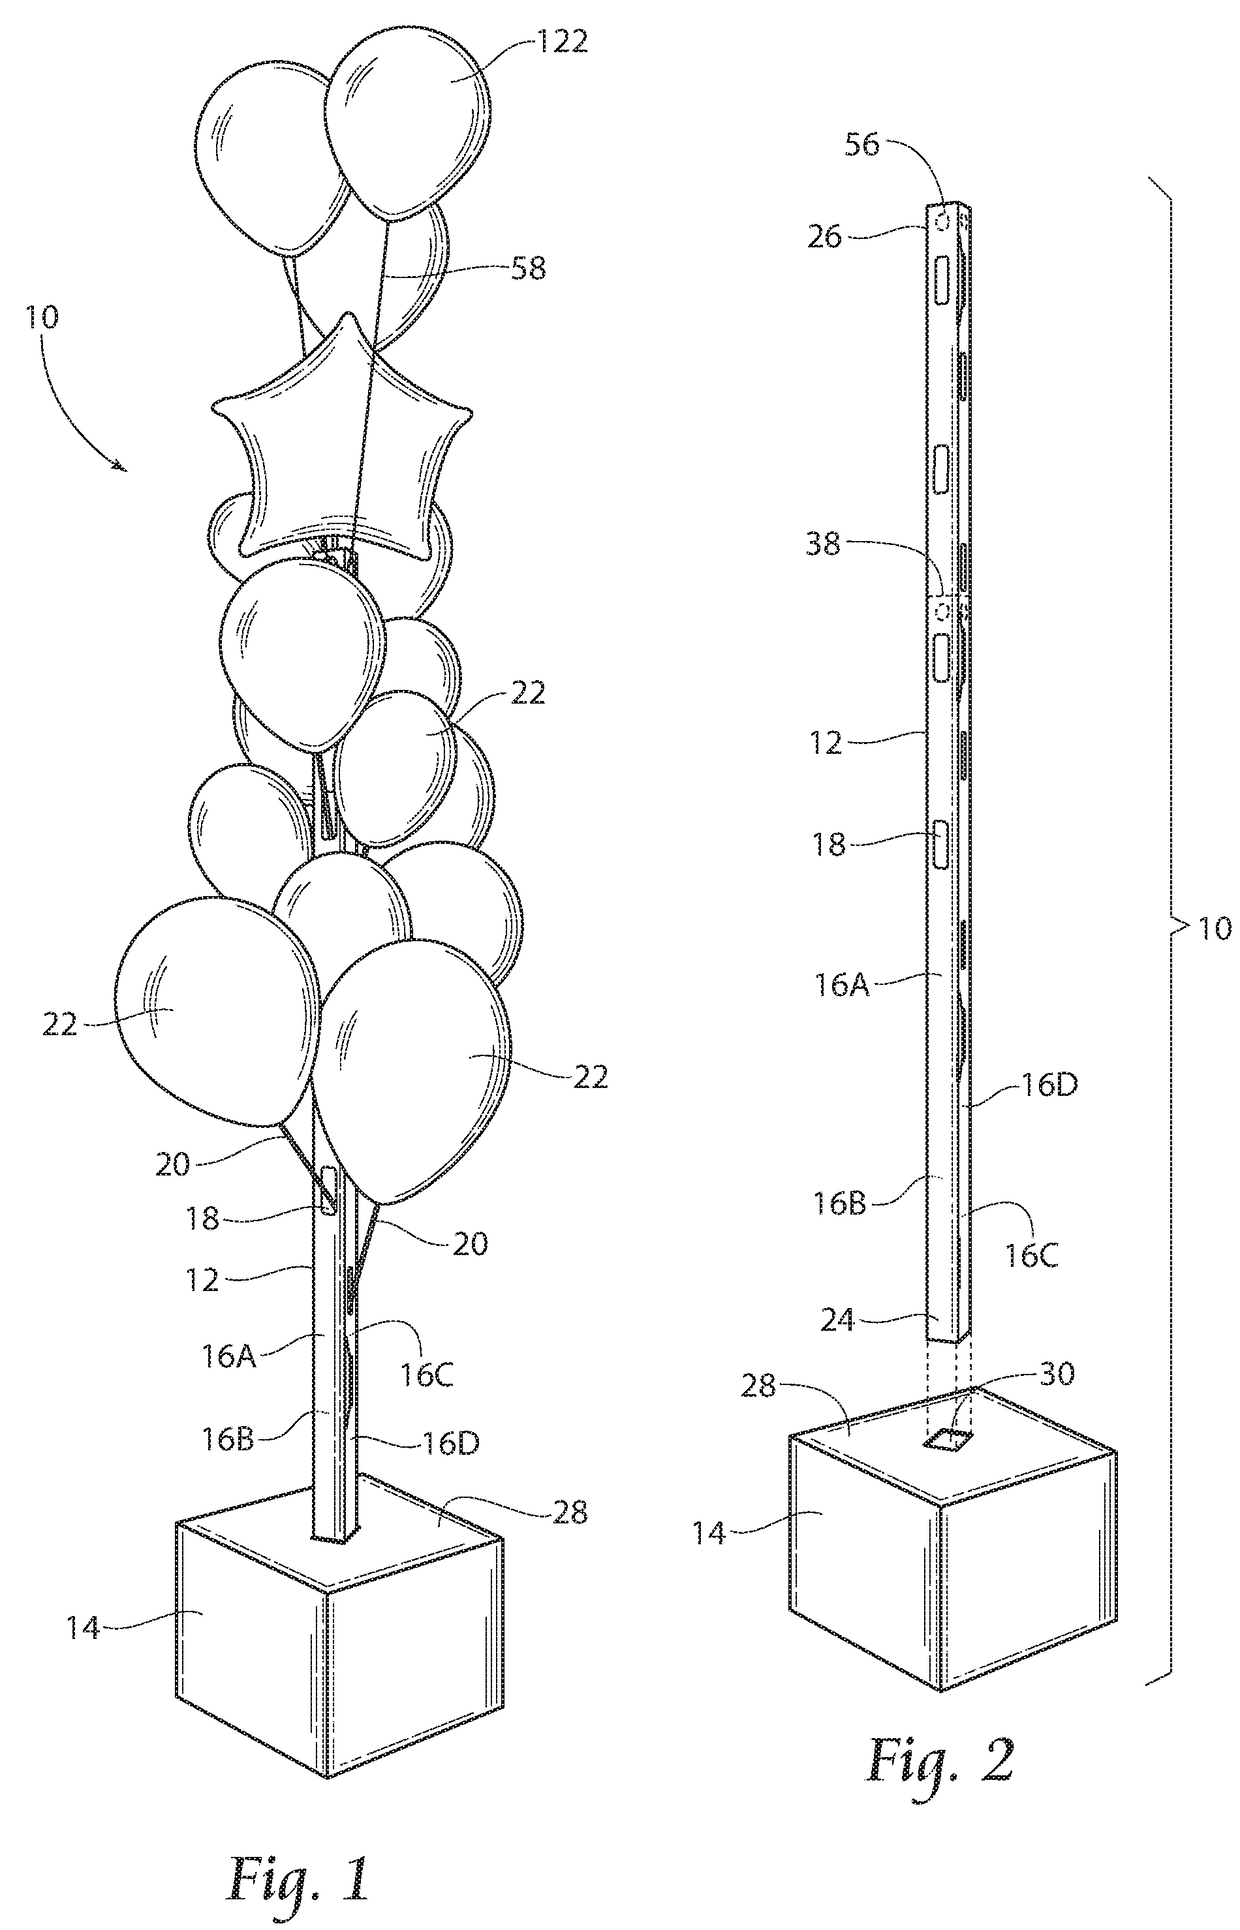 Balloon display structure